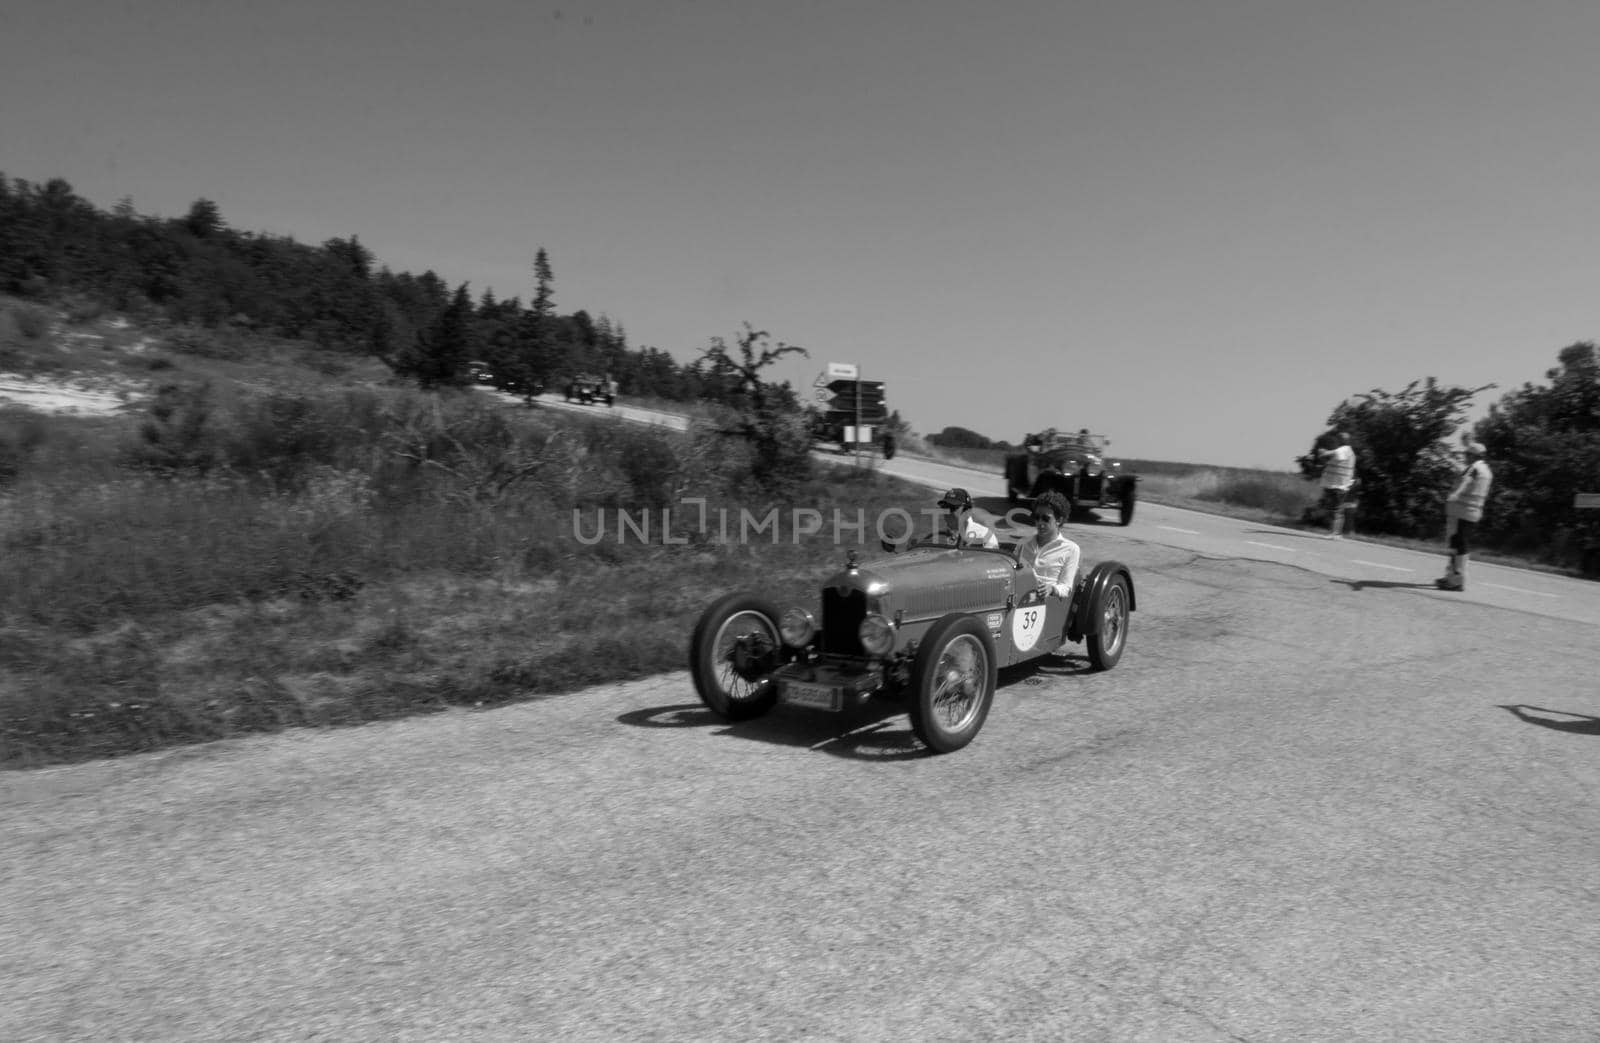 RALLY ABC 1100 1928 on an old racing car in rally Mille Miglia 2022 the famous italian historical race (1927-1957 by massimocampanari